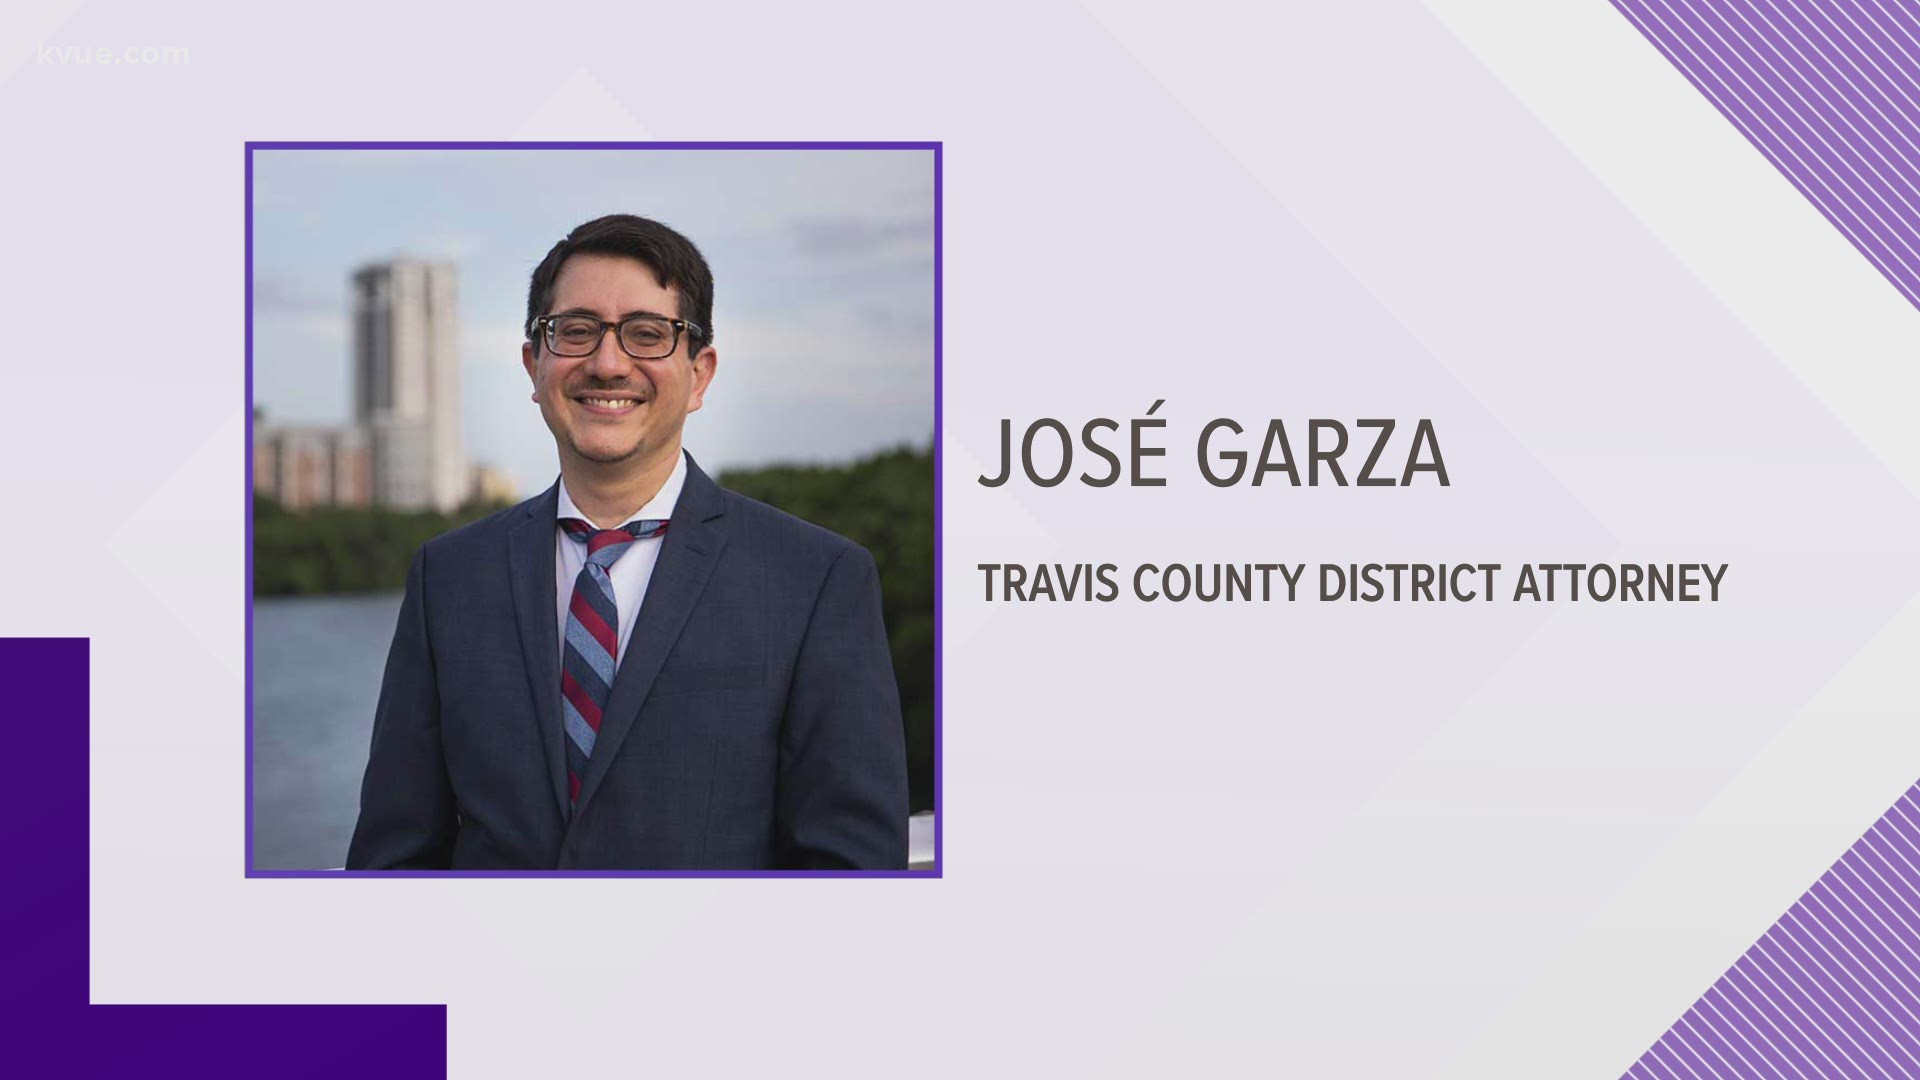 Travis County DA Jose Garza marked his 100th day in office by outlining new guidelines for prosecutors when it comes to sentencing recommendations in felony cases.